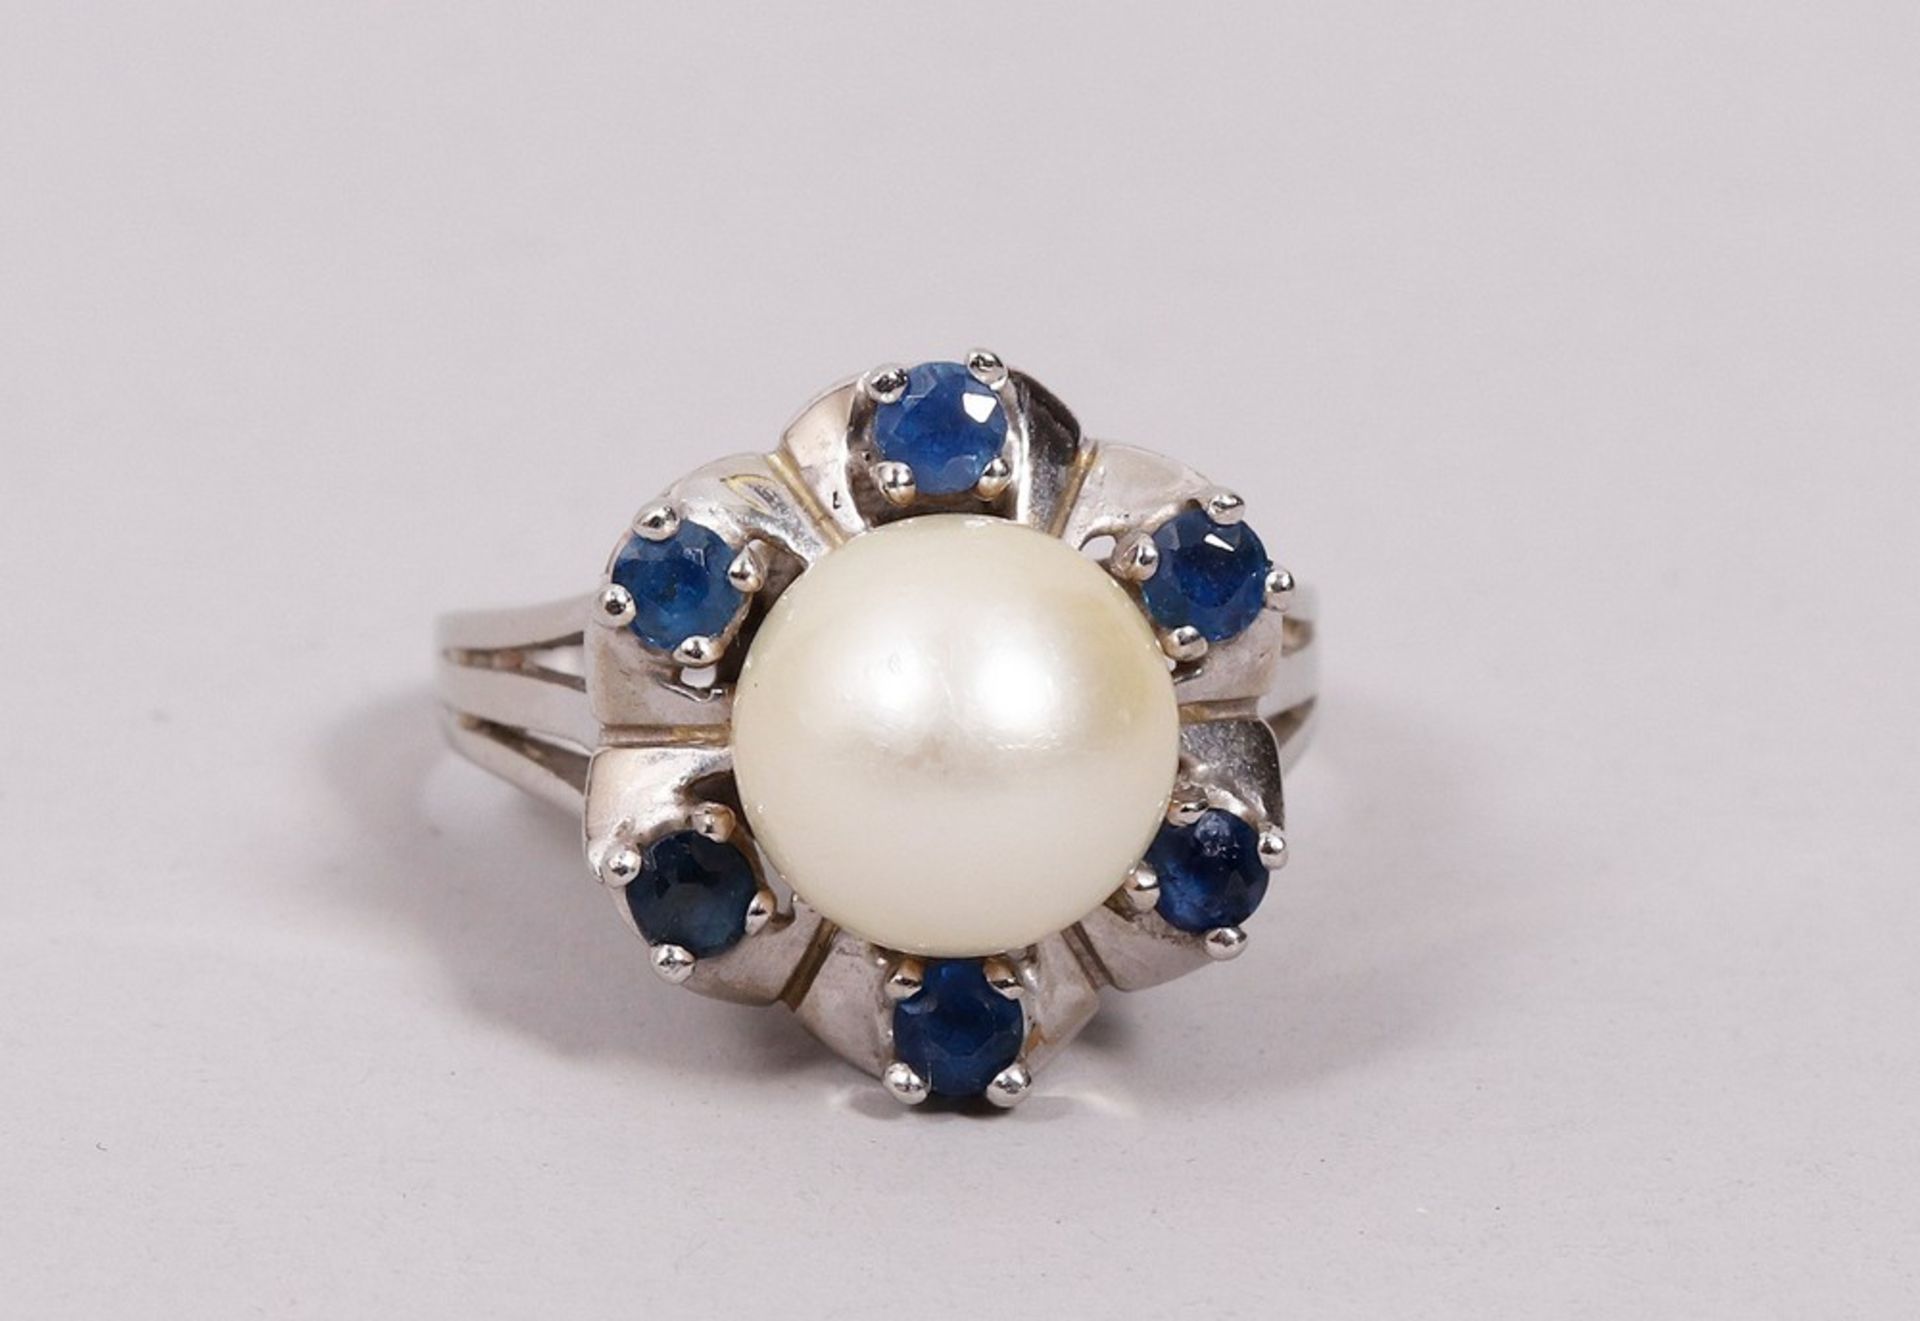 Pearl ring, 585 white gold, 20th C. - Image 4 of 5